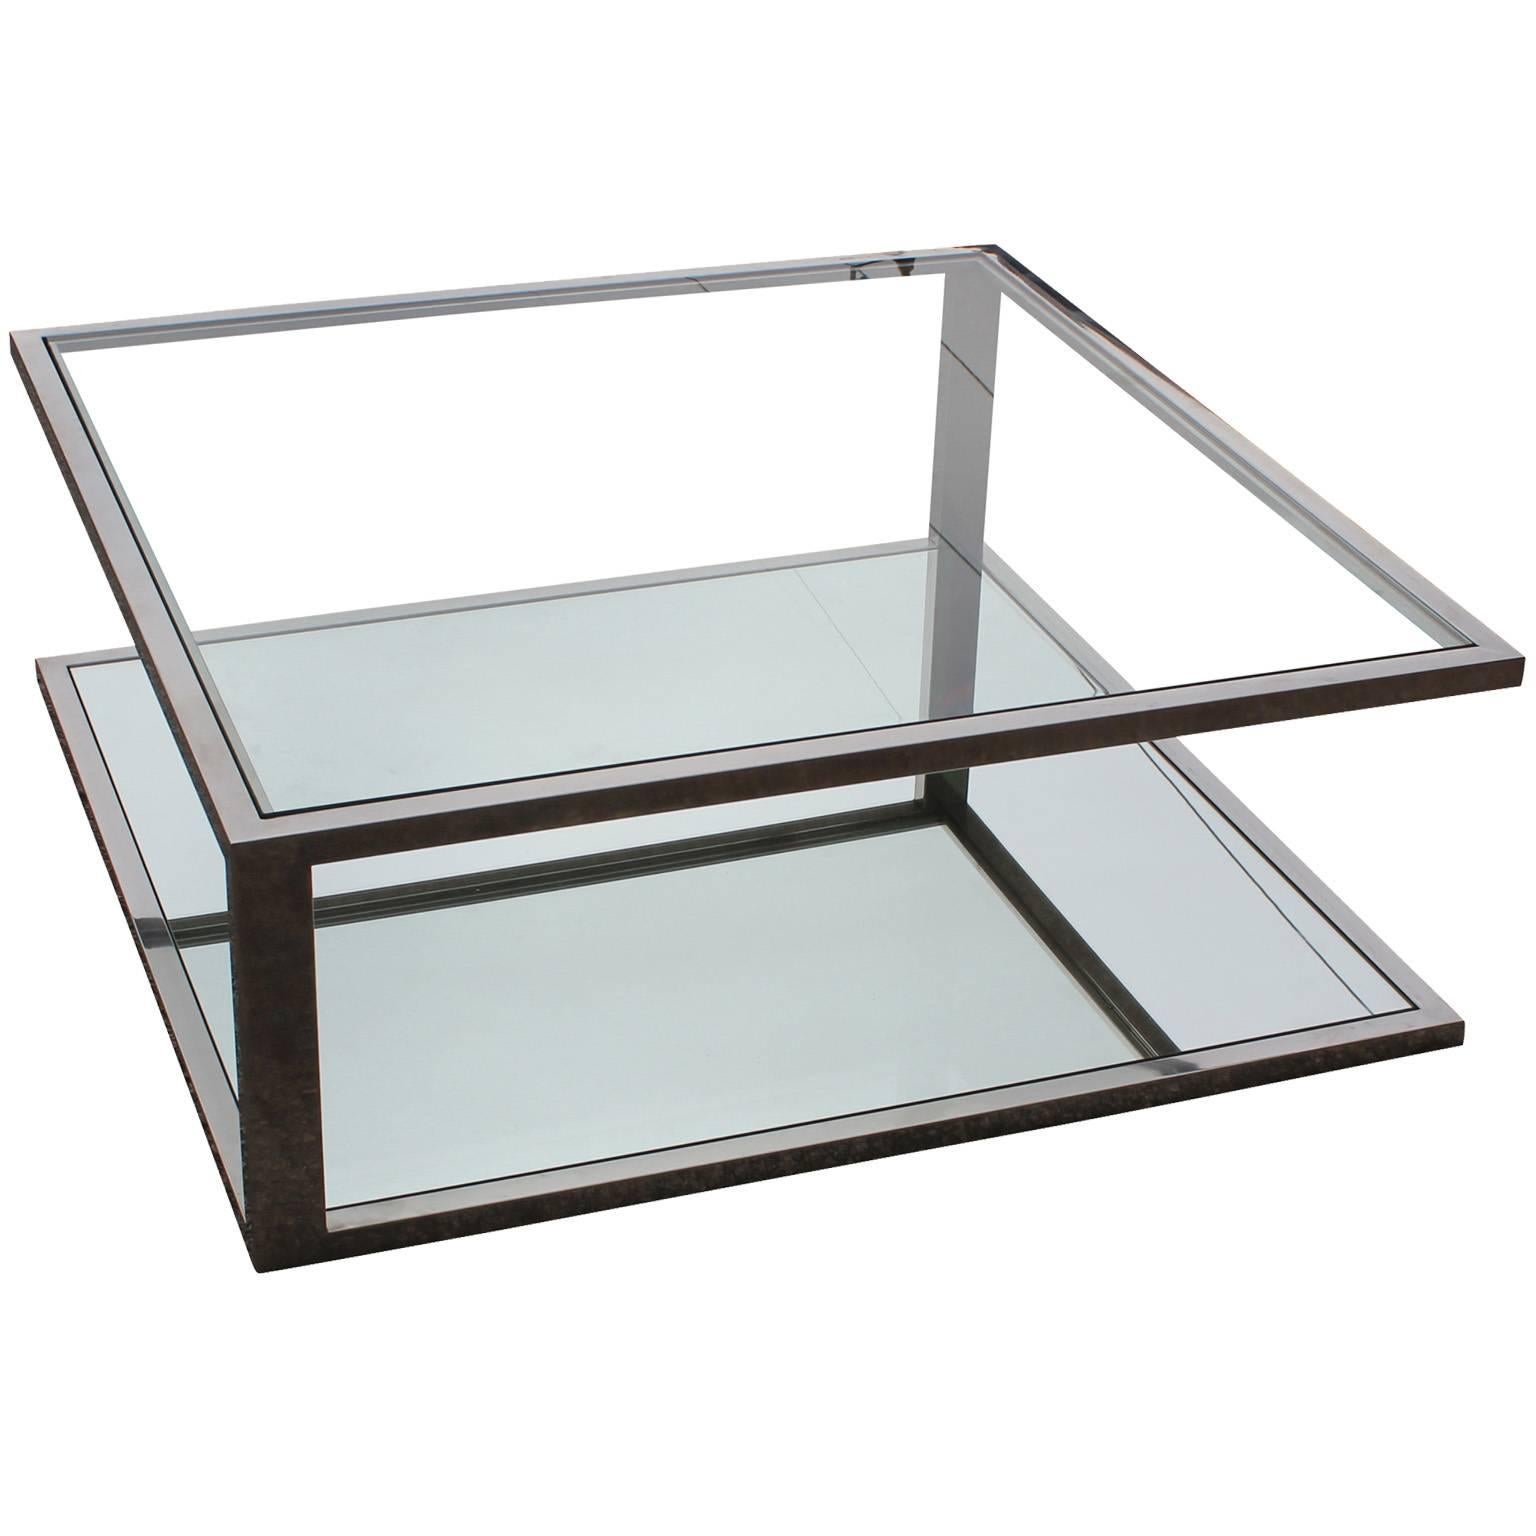 Hollywood Regency Angular Modernist Square Chrome and Glass Coffee Table